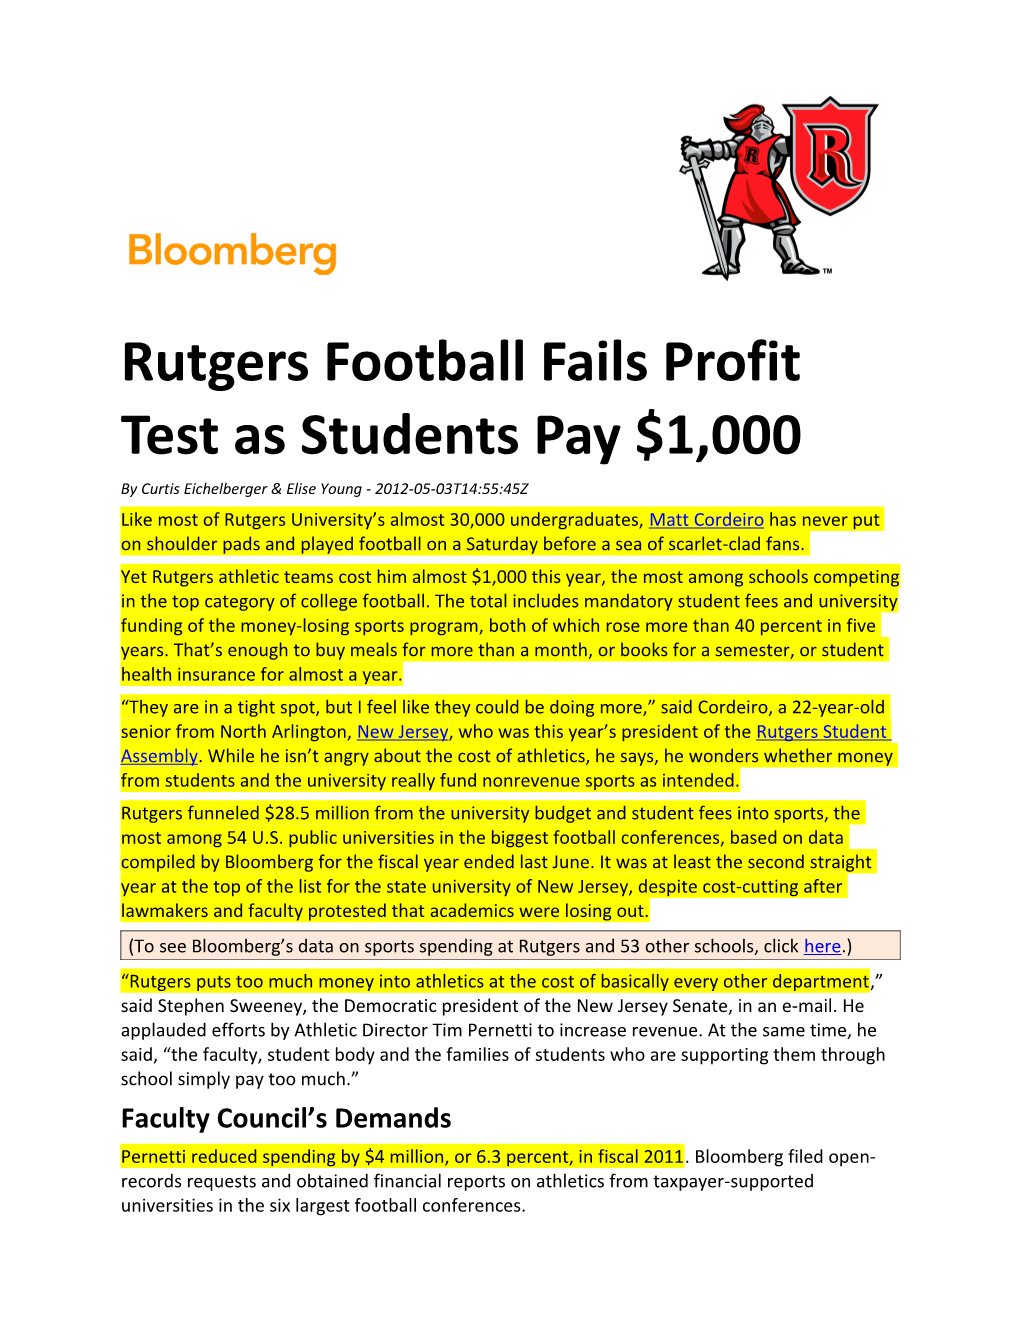 Rutgers Football Fails Profit Test As Students Pay $1,000